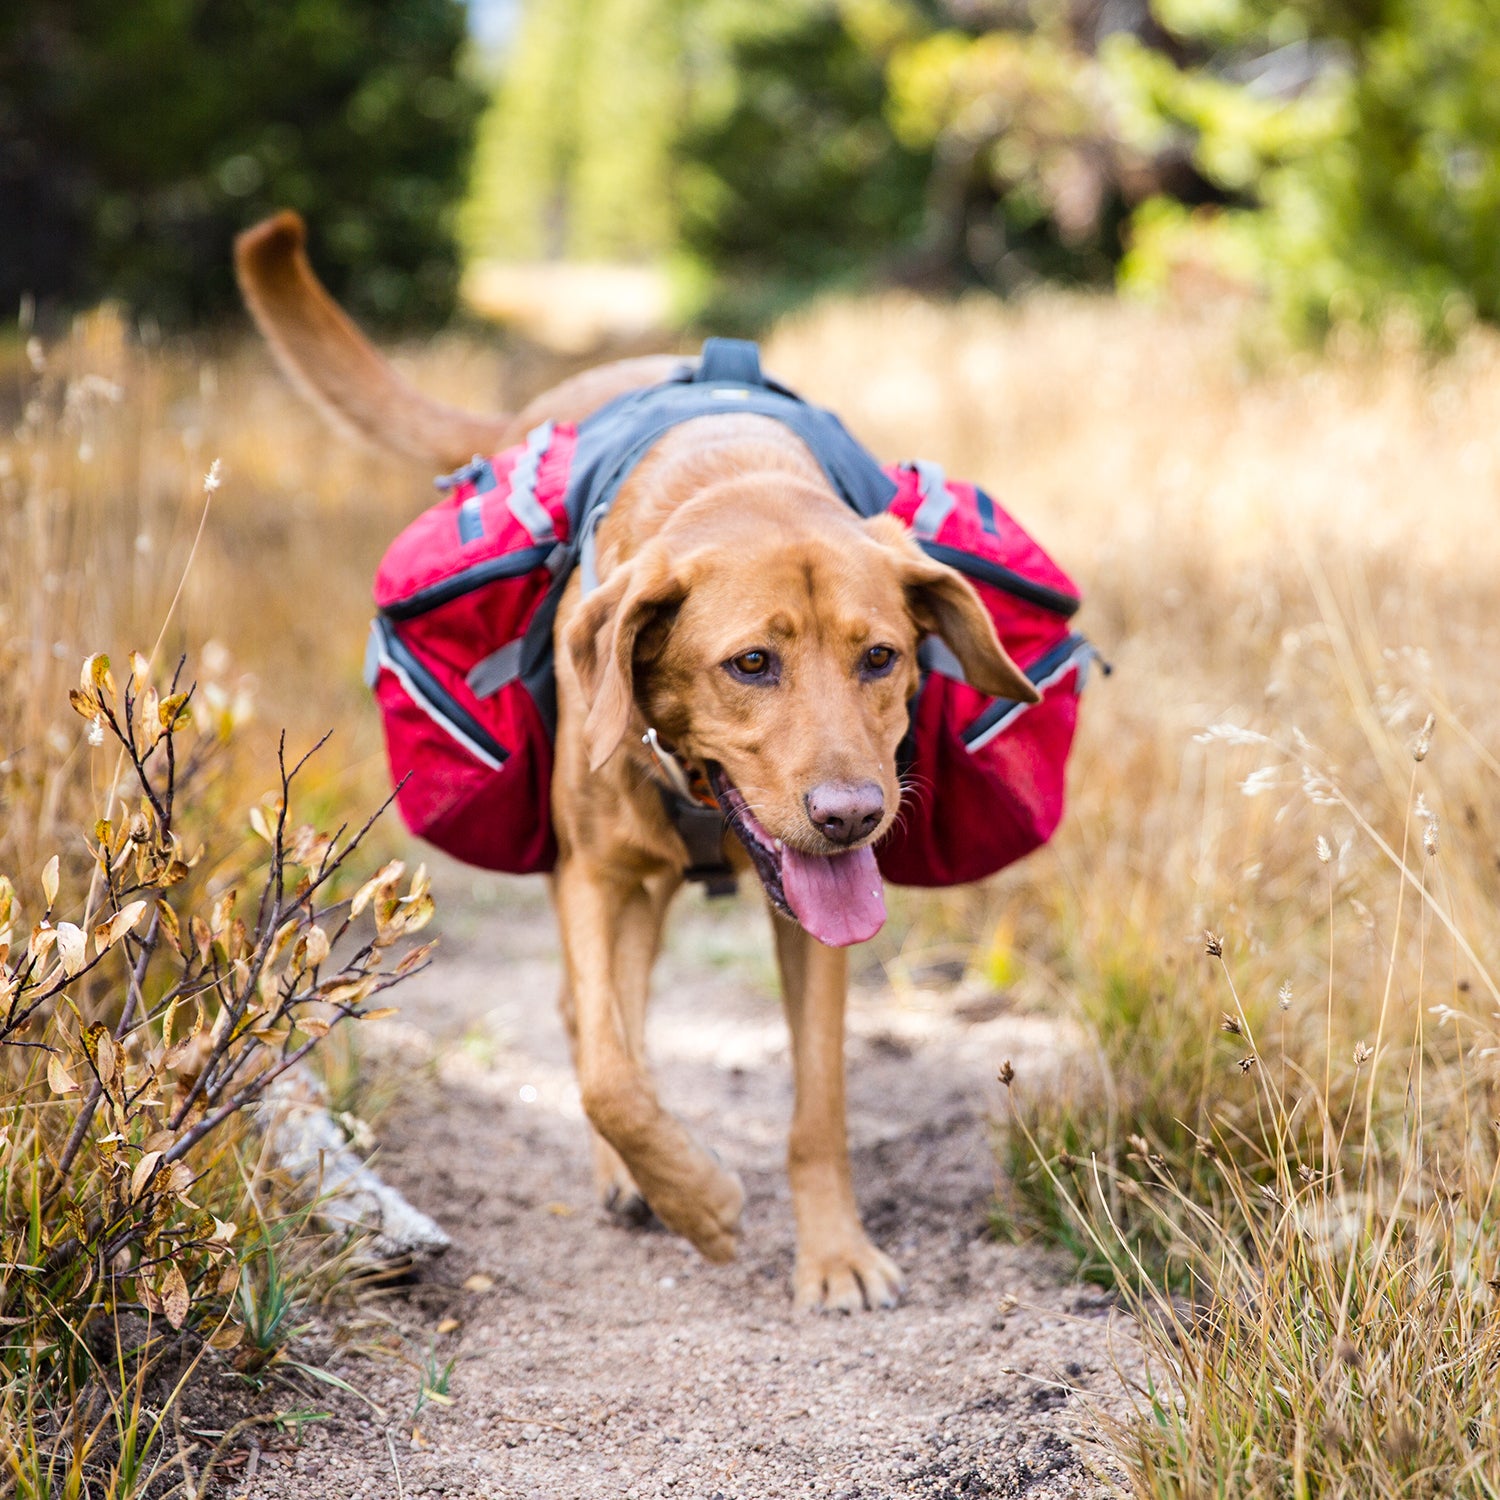 Gear to keep pets safe, comfortable and entertained